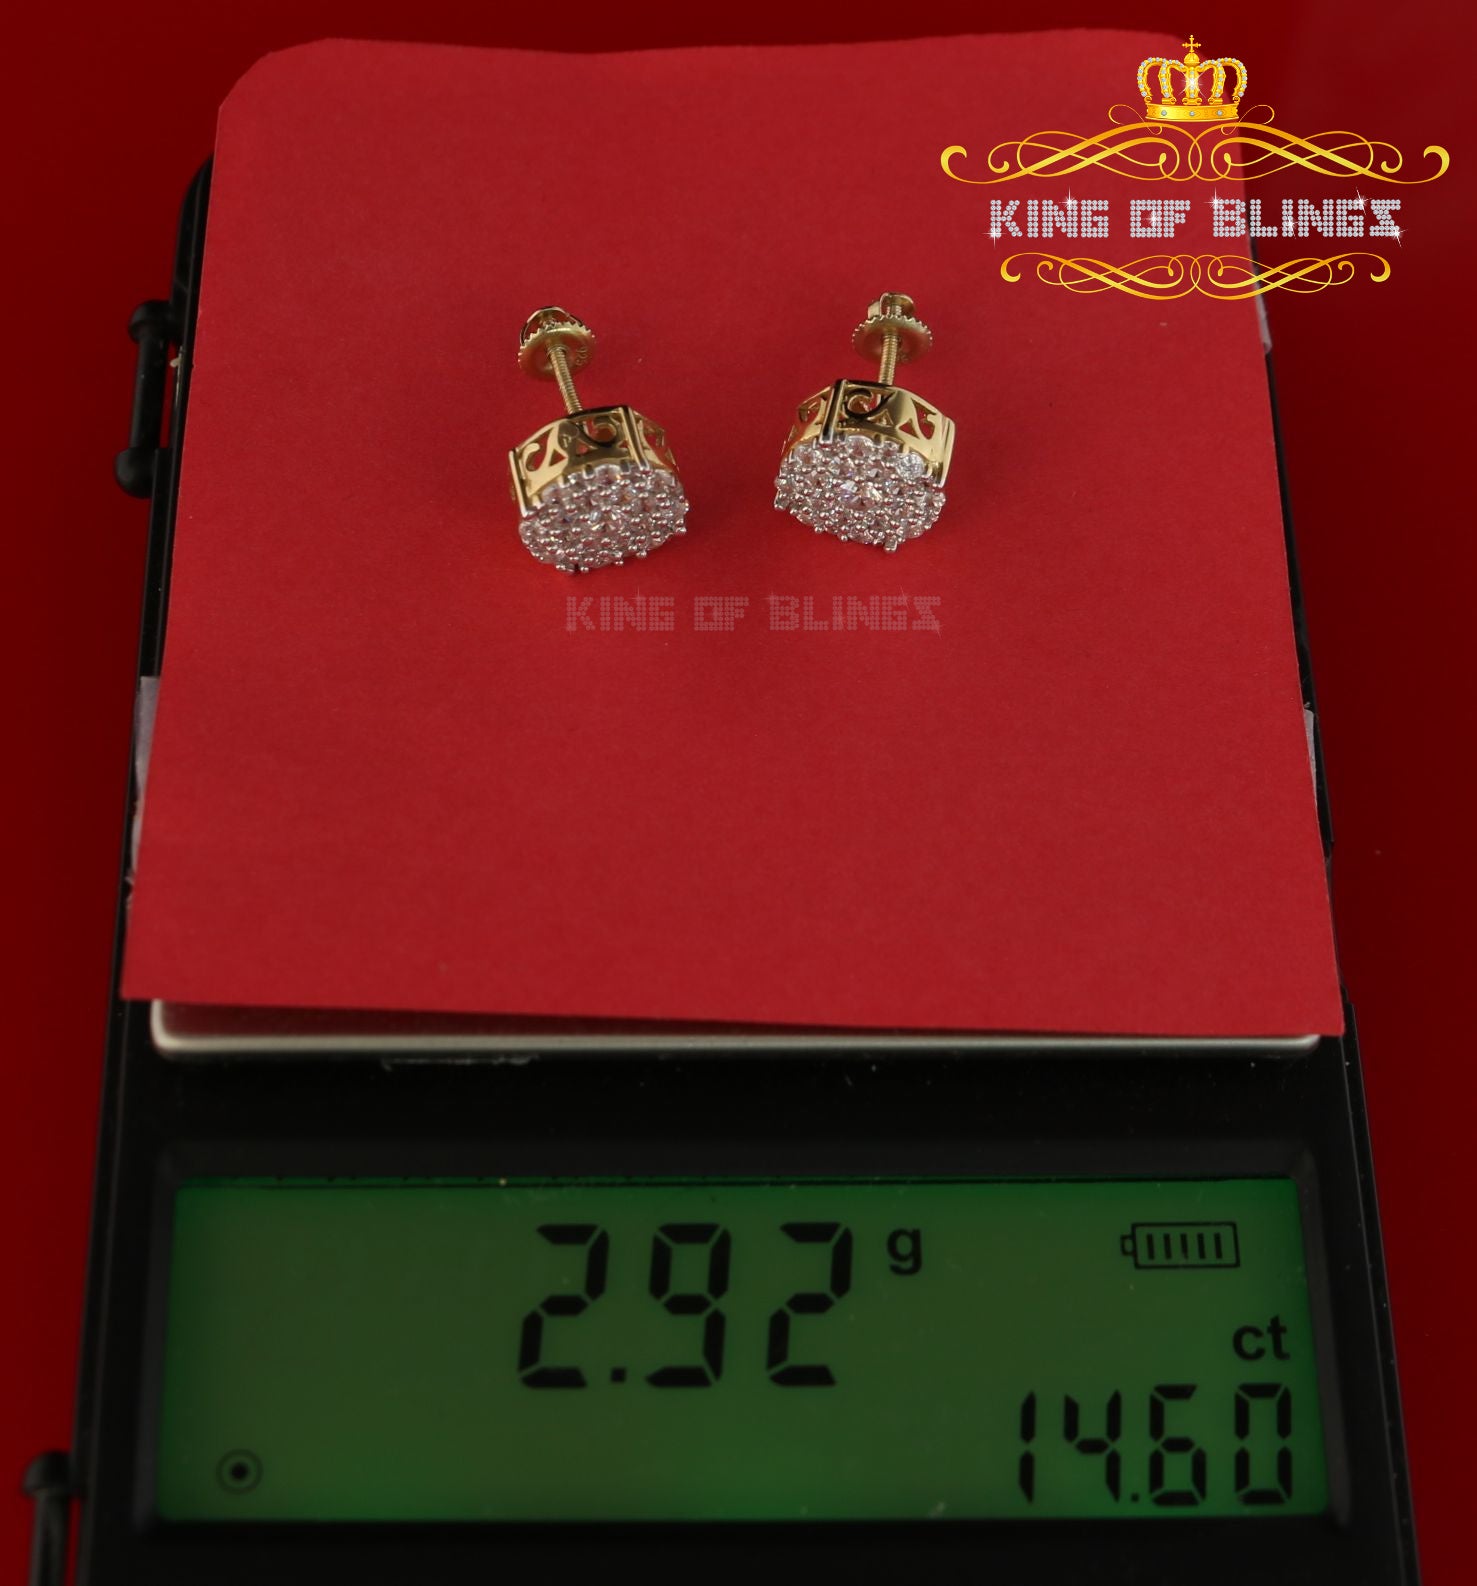 King of Bling's Aretes Para Hombre 925 Yellow Silver 1.20ct Cubic Zirconia Round Women's Earrings KING OF BLINGS